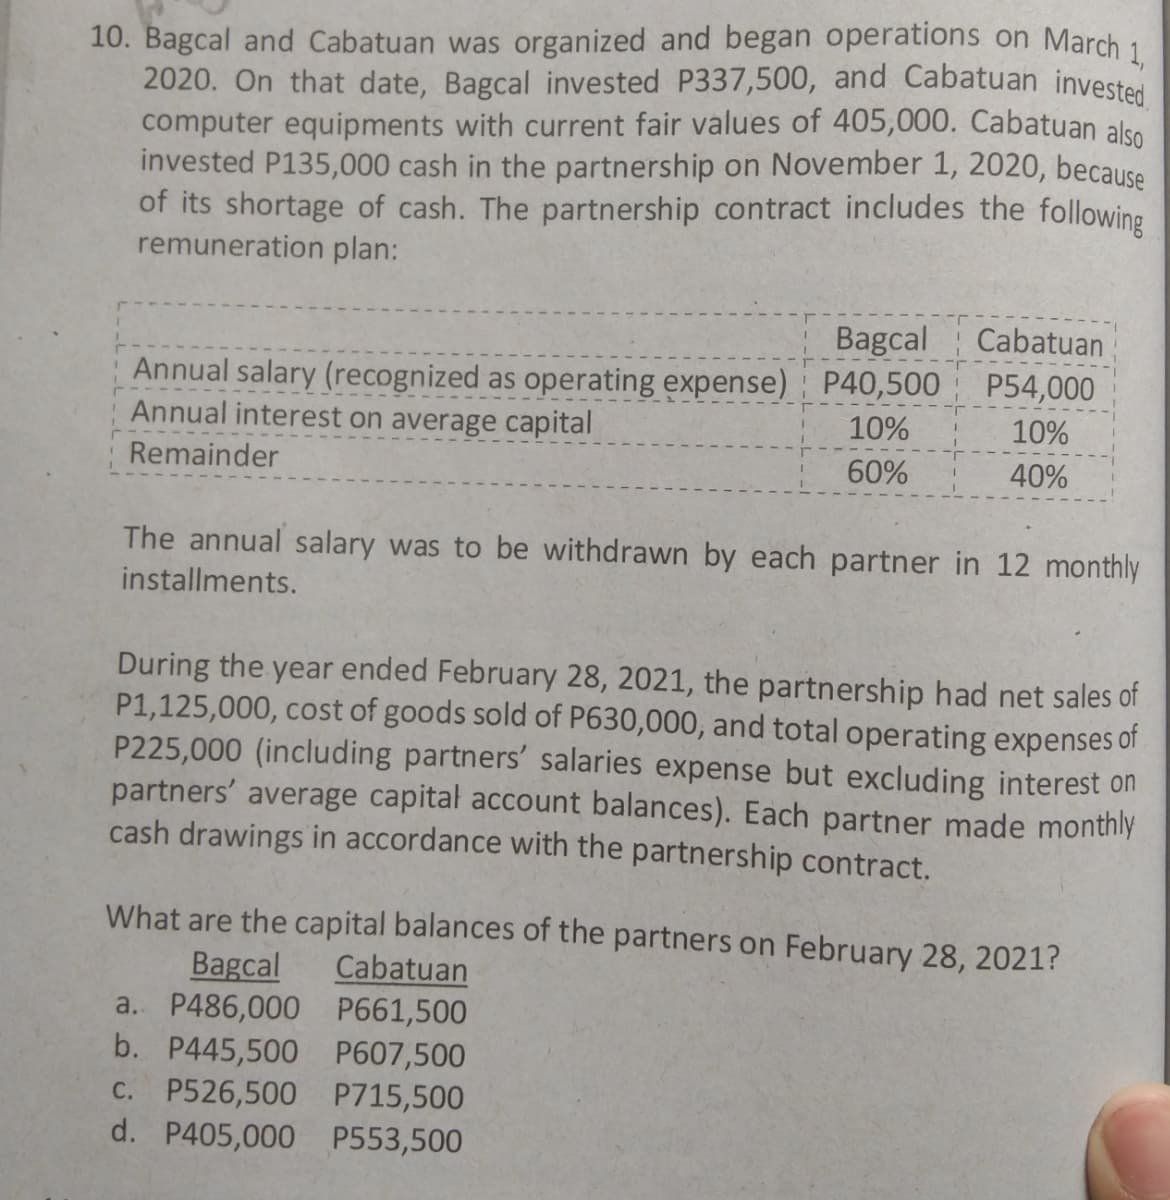 10. Bagcal and Cabatuan was organized and began operations on March 1
2020. On that date, Bagcal invested P337,500, and Cabatuan invested
computer equipments with current fair values of 405,000. Cabatuan also
invested P135,000 cash in the partnership on November 1, 2020, because
of its shortage of cash. The partnership contract includes the following
remuneration plan:
Bagcal
Cabatuan
Annual salary (recognized as operating expense) P40,500 P54,000
Annual interest on average capital
10%
10%
Remainder
60%
40%
The annual salary was to be withdrawn by each partner in 12 monthly
installments.
During the year ended February 28, 2021, the partnership had net sales of
P1,125,000, cost of goods sold of P630,000, and total operating expenses of
P225,000 (including partners' salaries expense but excluding interest on
partners' average capital account balances). Each partner made monthly
cash drawings in accordance with the partnership contract.
What are the capital balances of the partners on February 28, 2021?
Bagcal
a. P486,000 P661,500
b. P445,500 P607,500
c. P526,500 P715,500
d. P405,000 P553,500
Cabatuan
